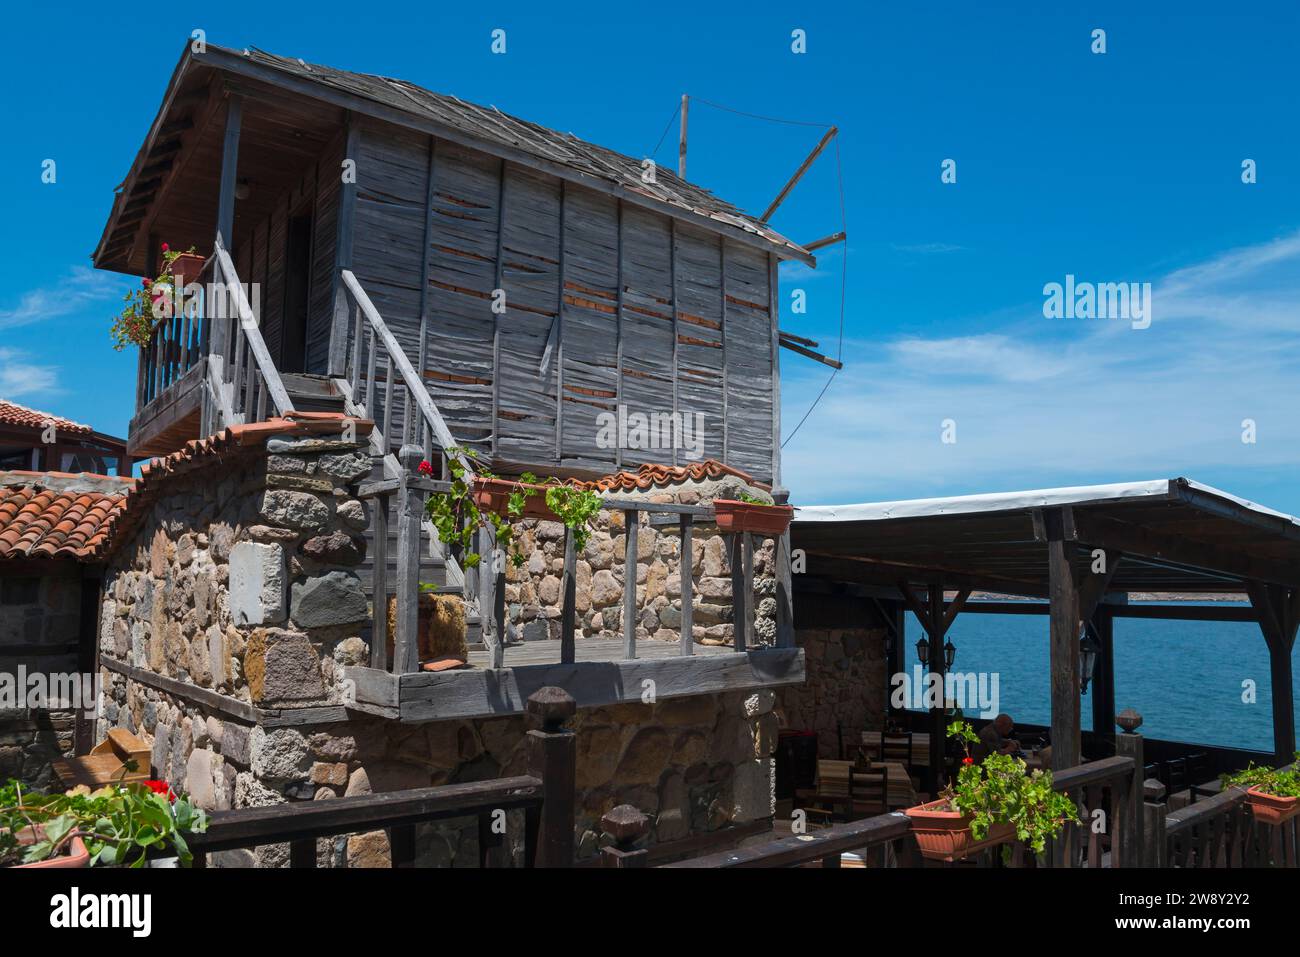 Rustic wooden windmill overlooking the sea, surrounded by plants under a blue sky, Restaurant The Windmill, Windmill, Old Town, Sosopol, Sozopol Stock Photo